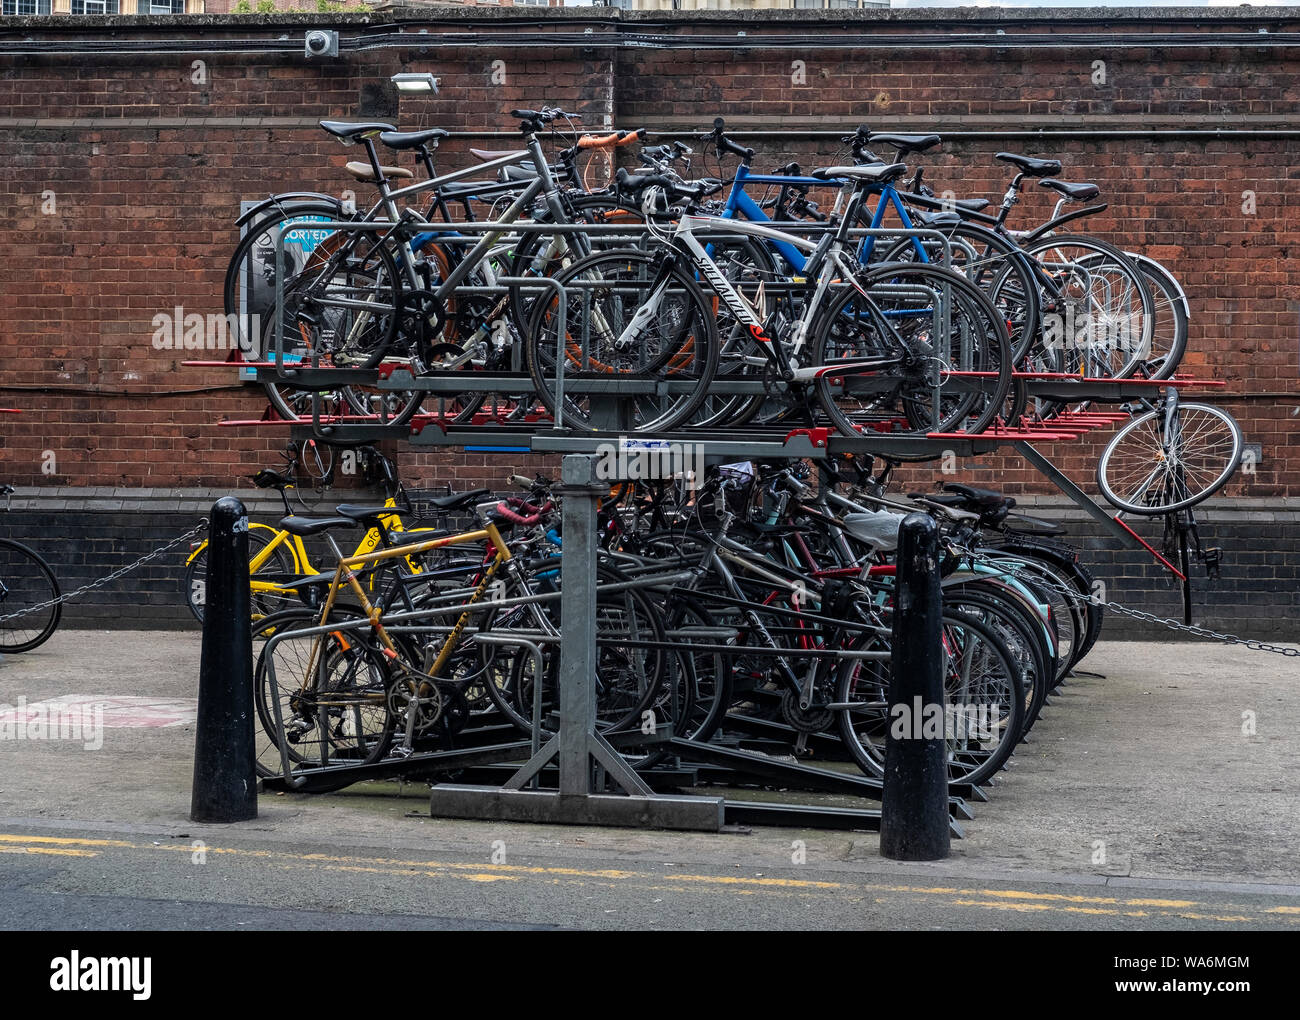 Bicycle rack full of bikes at cycle storage facility in Waterloo station, London, United Kingdom Stock Photo